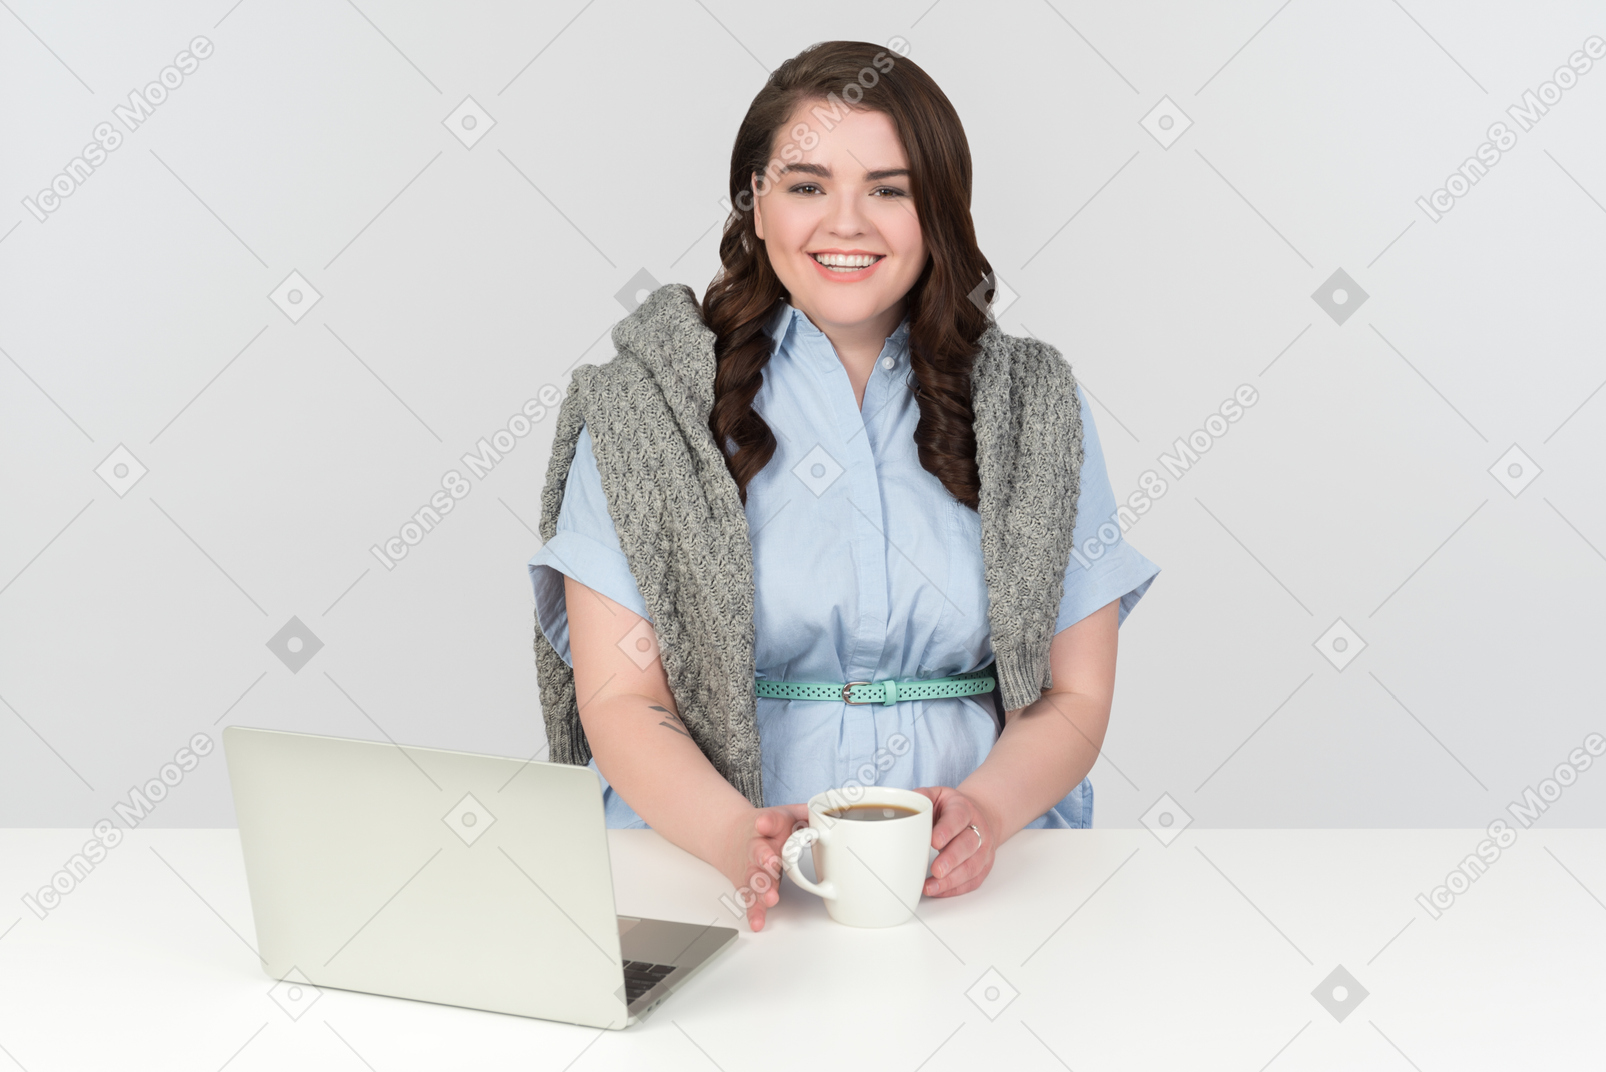 Smiling young woman with laptop